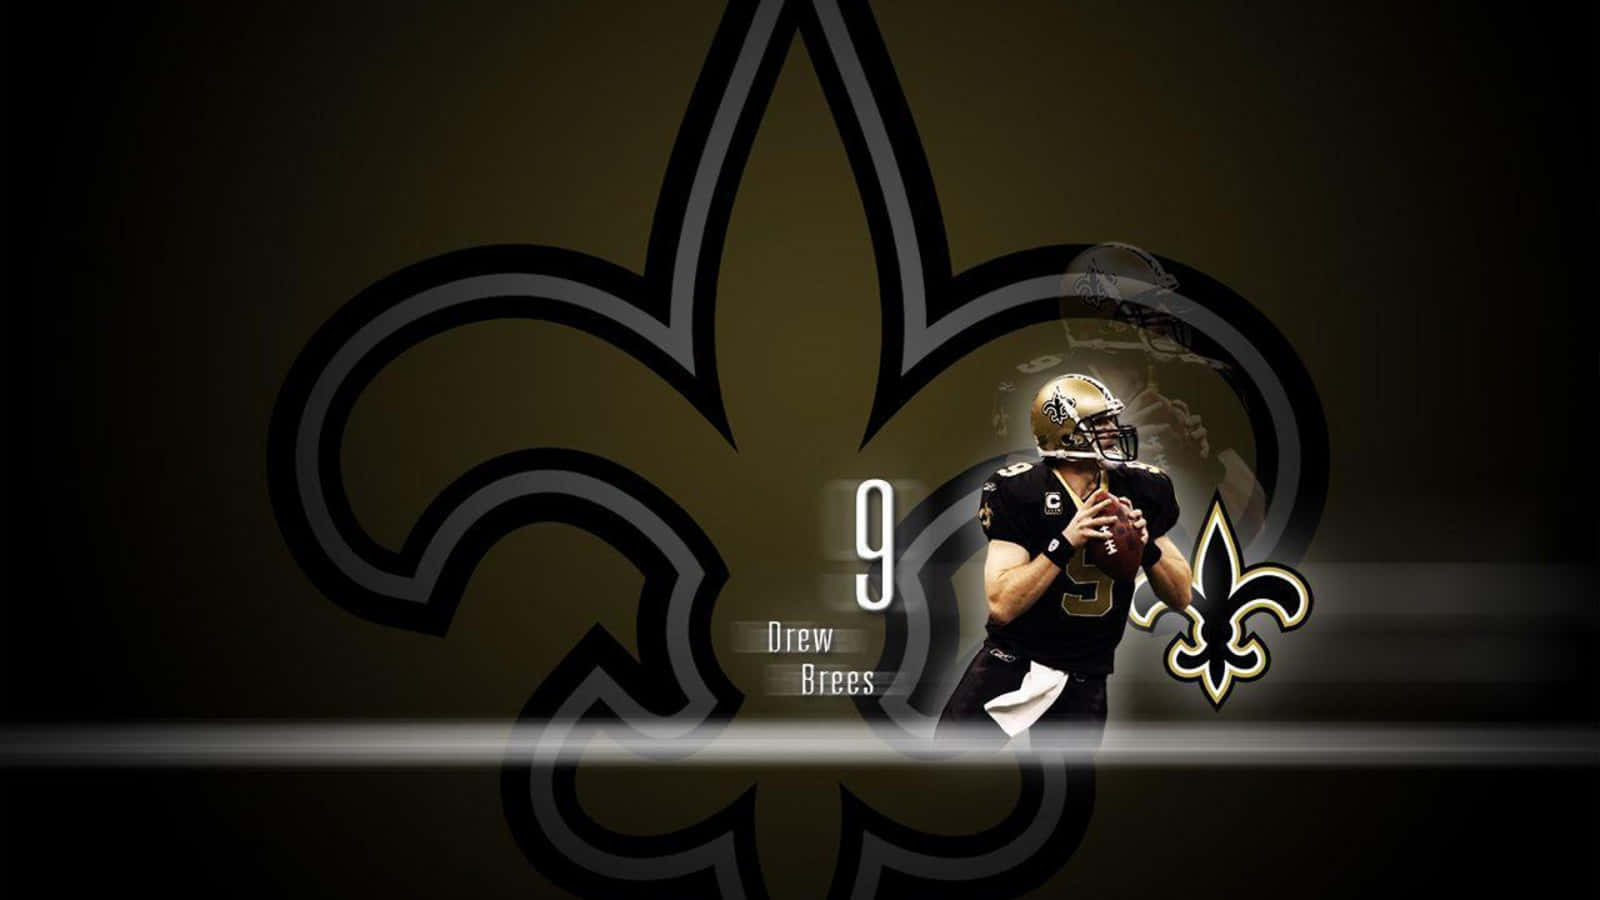 The New Orleans Saints Logo With A Football Player Wallpaper